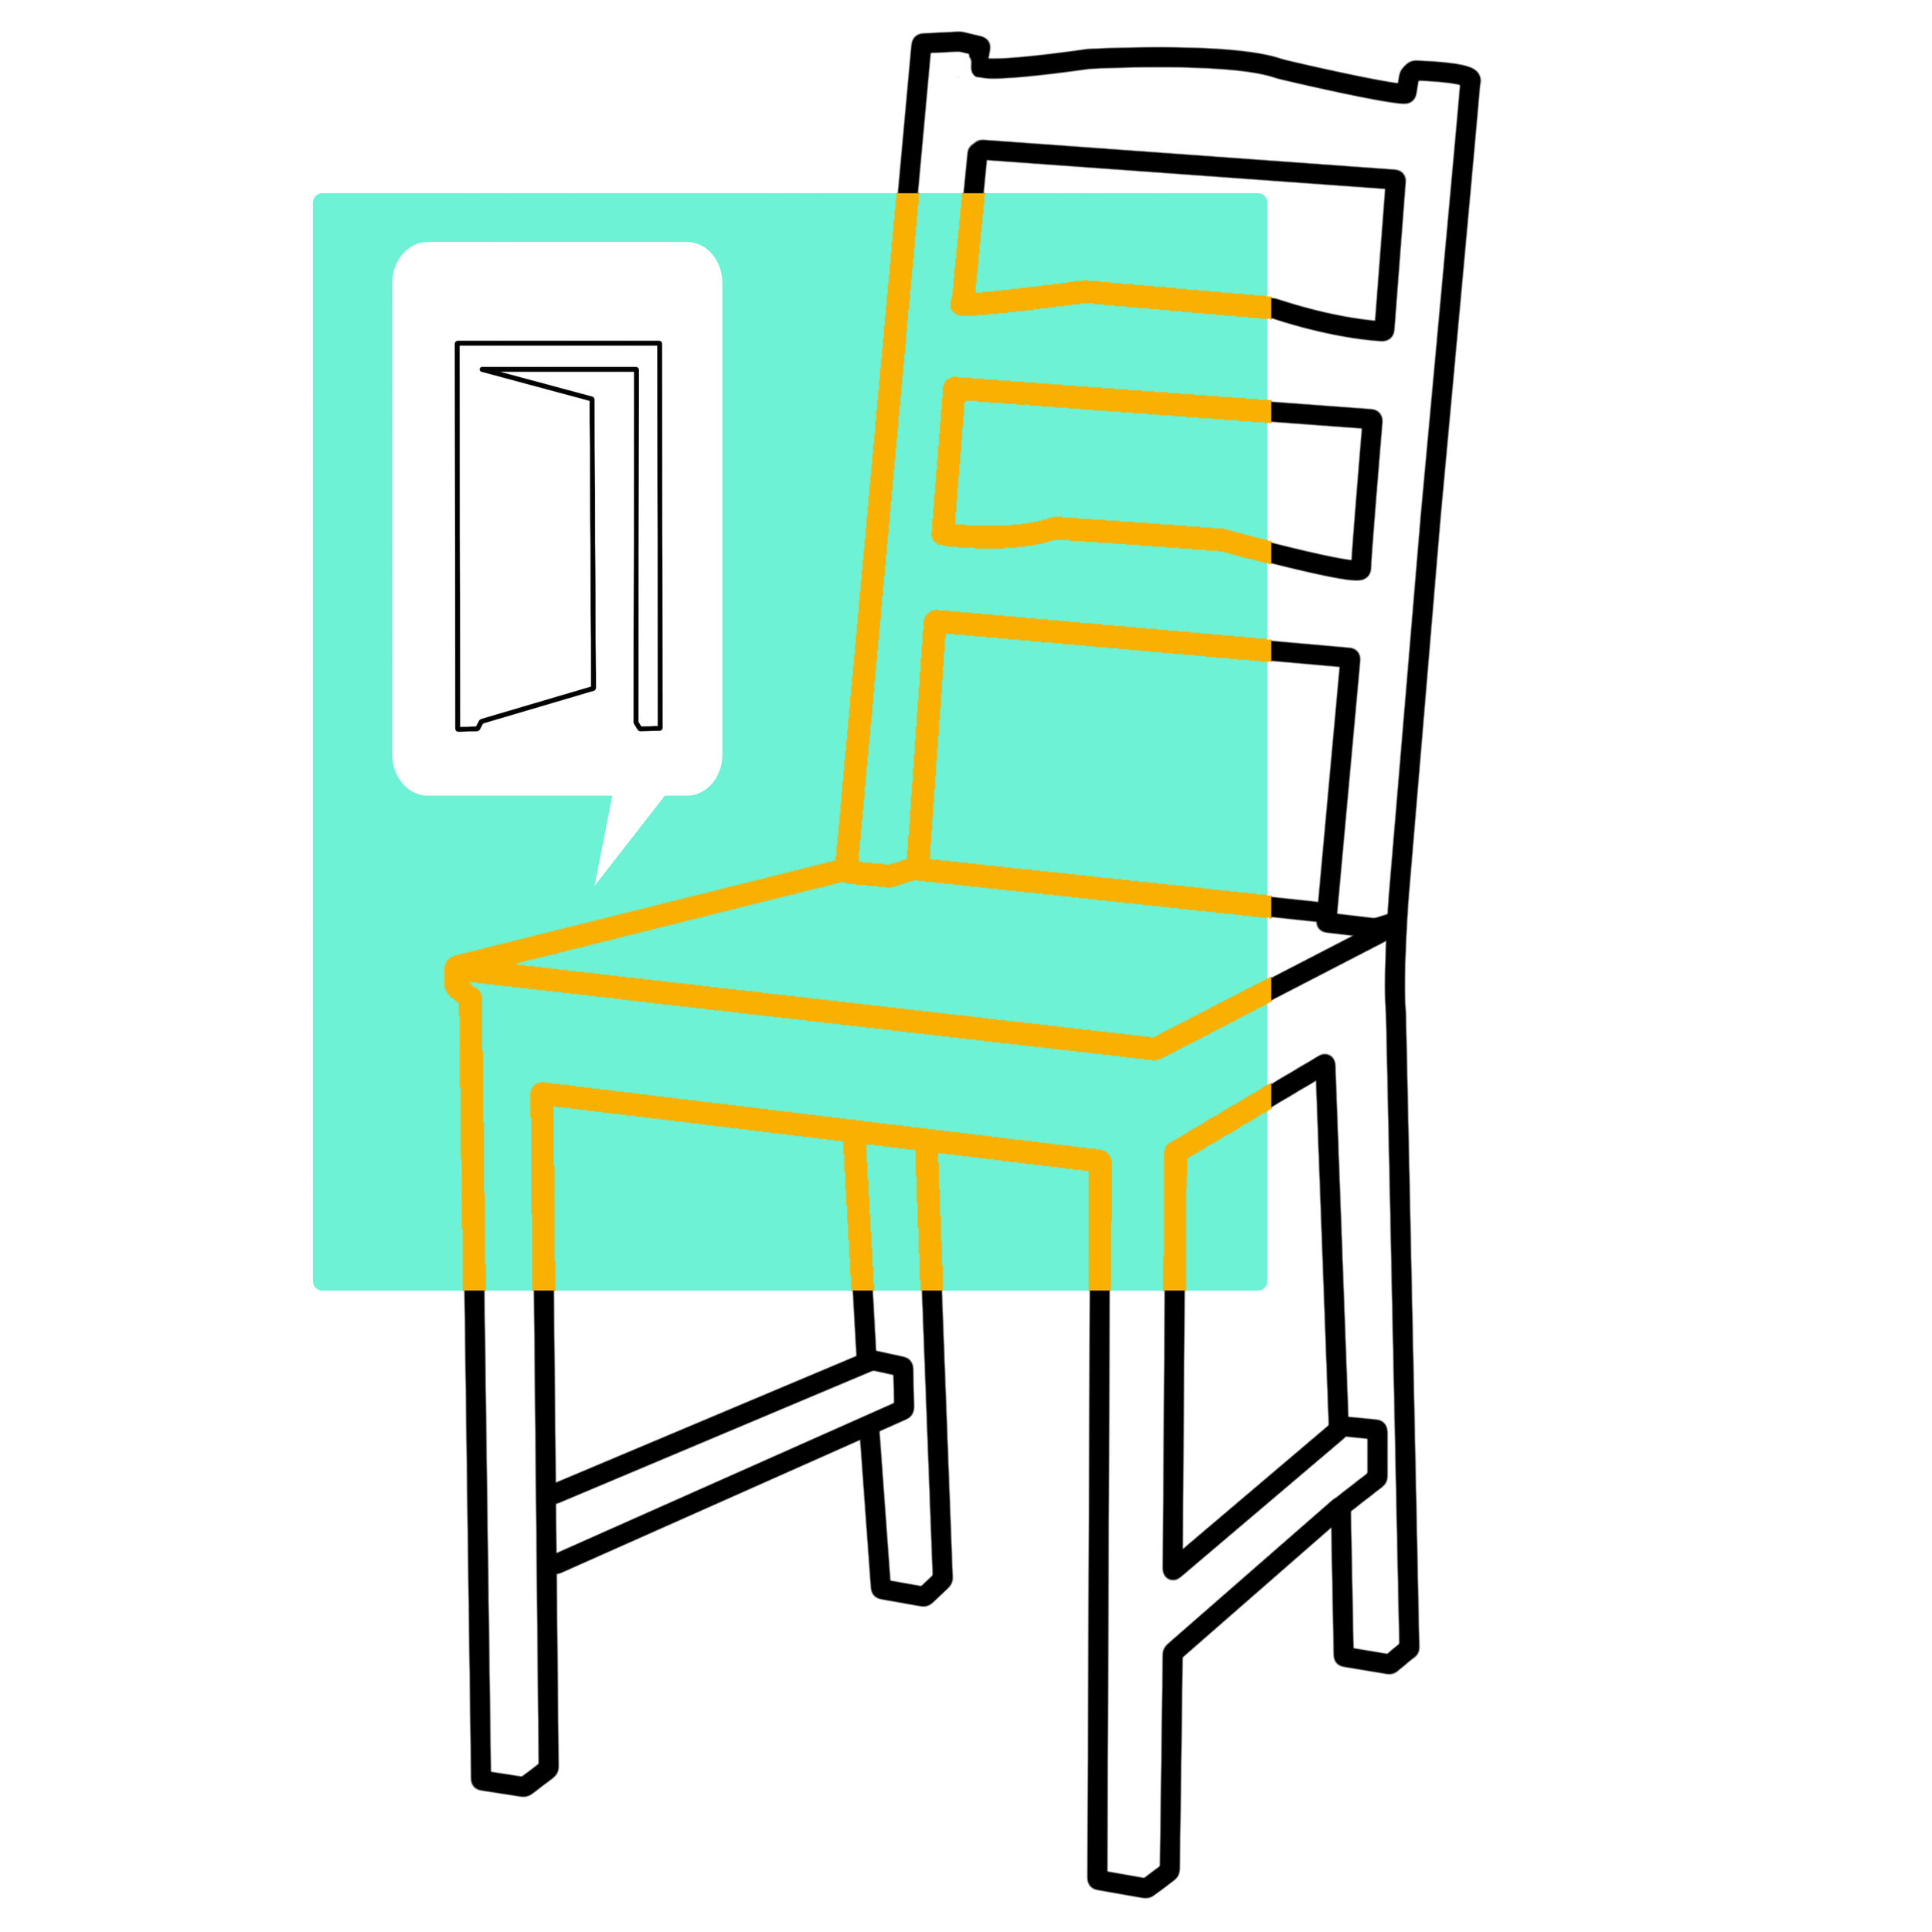 Of Chairs and Closets